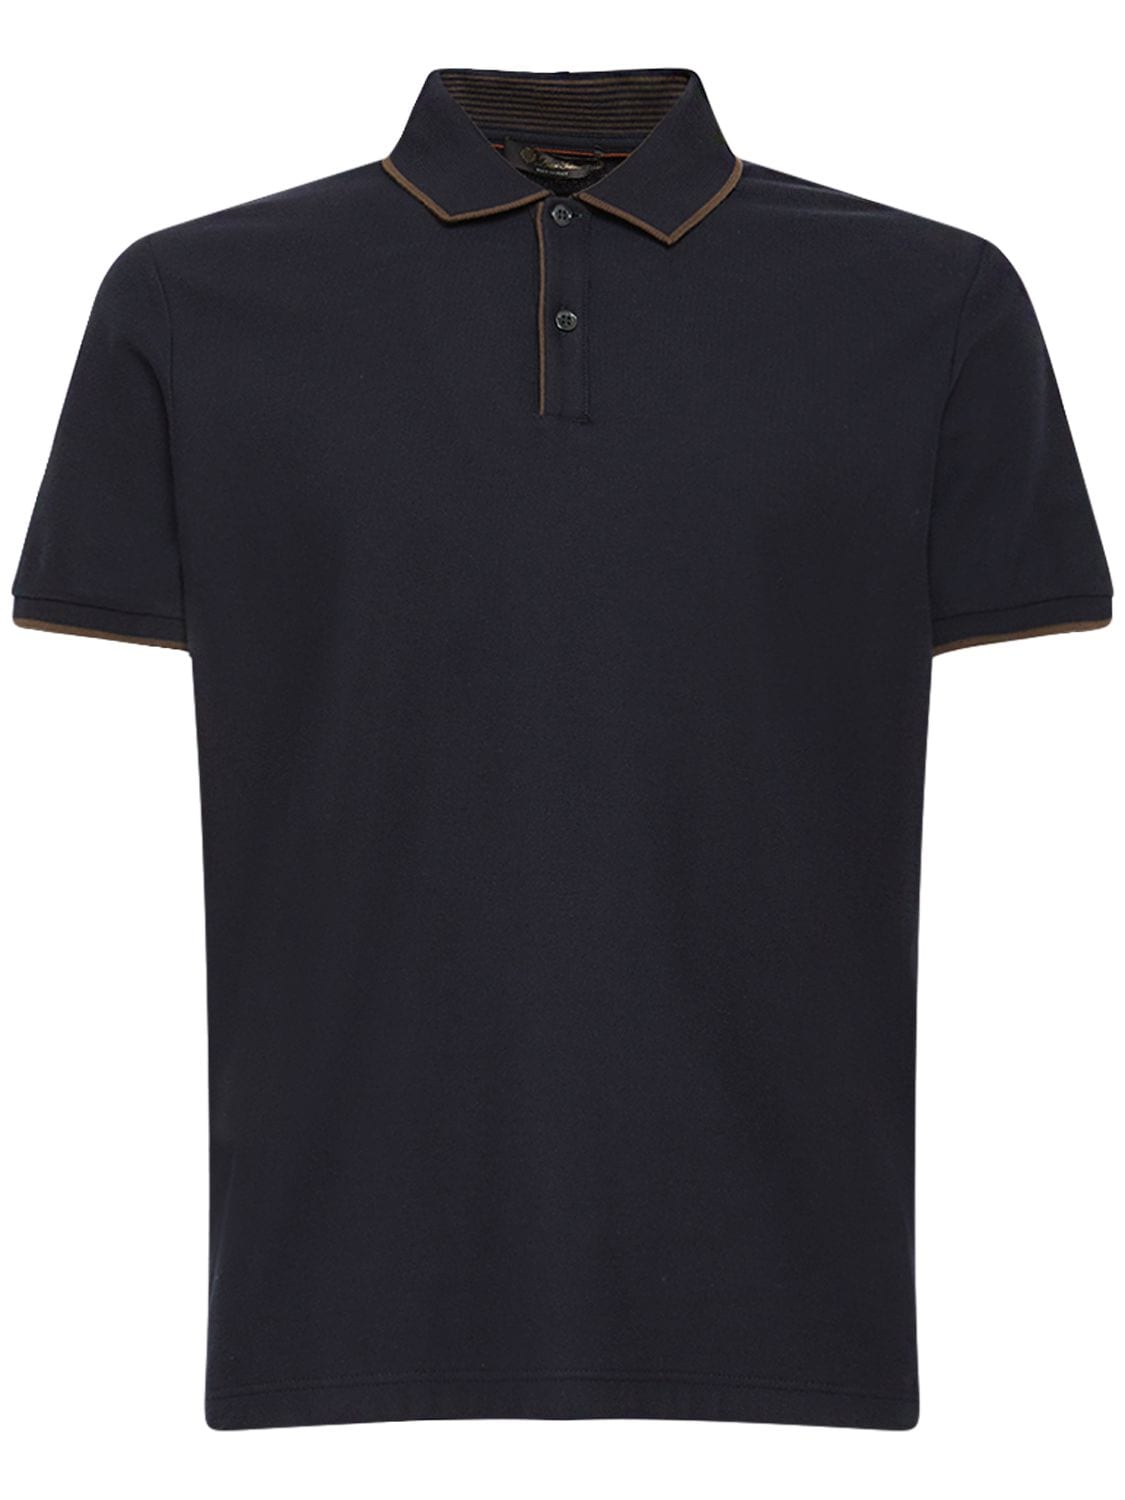 Image of Brentwood Honeycomb Jersey Piqué Polo